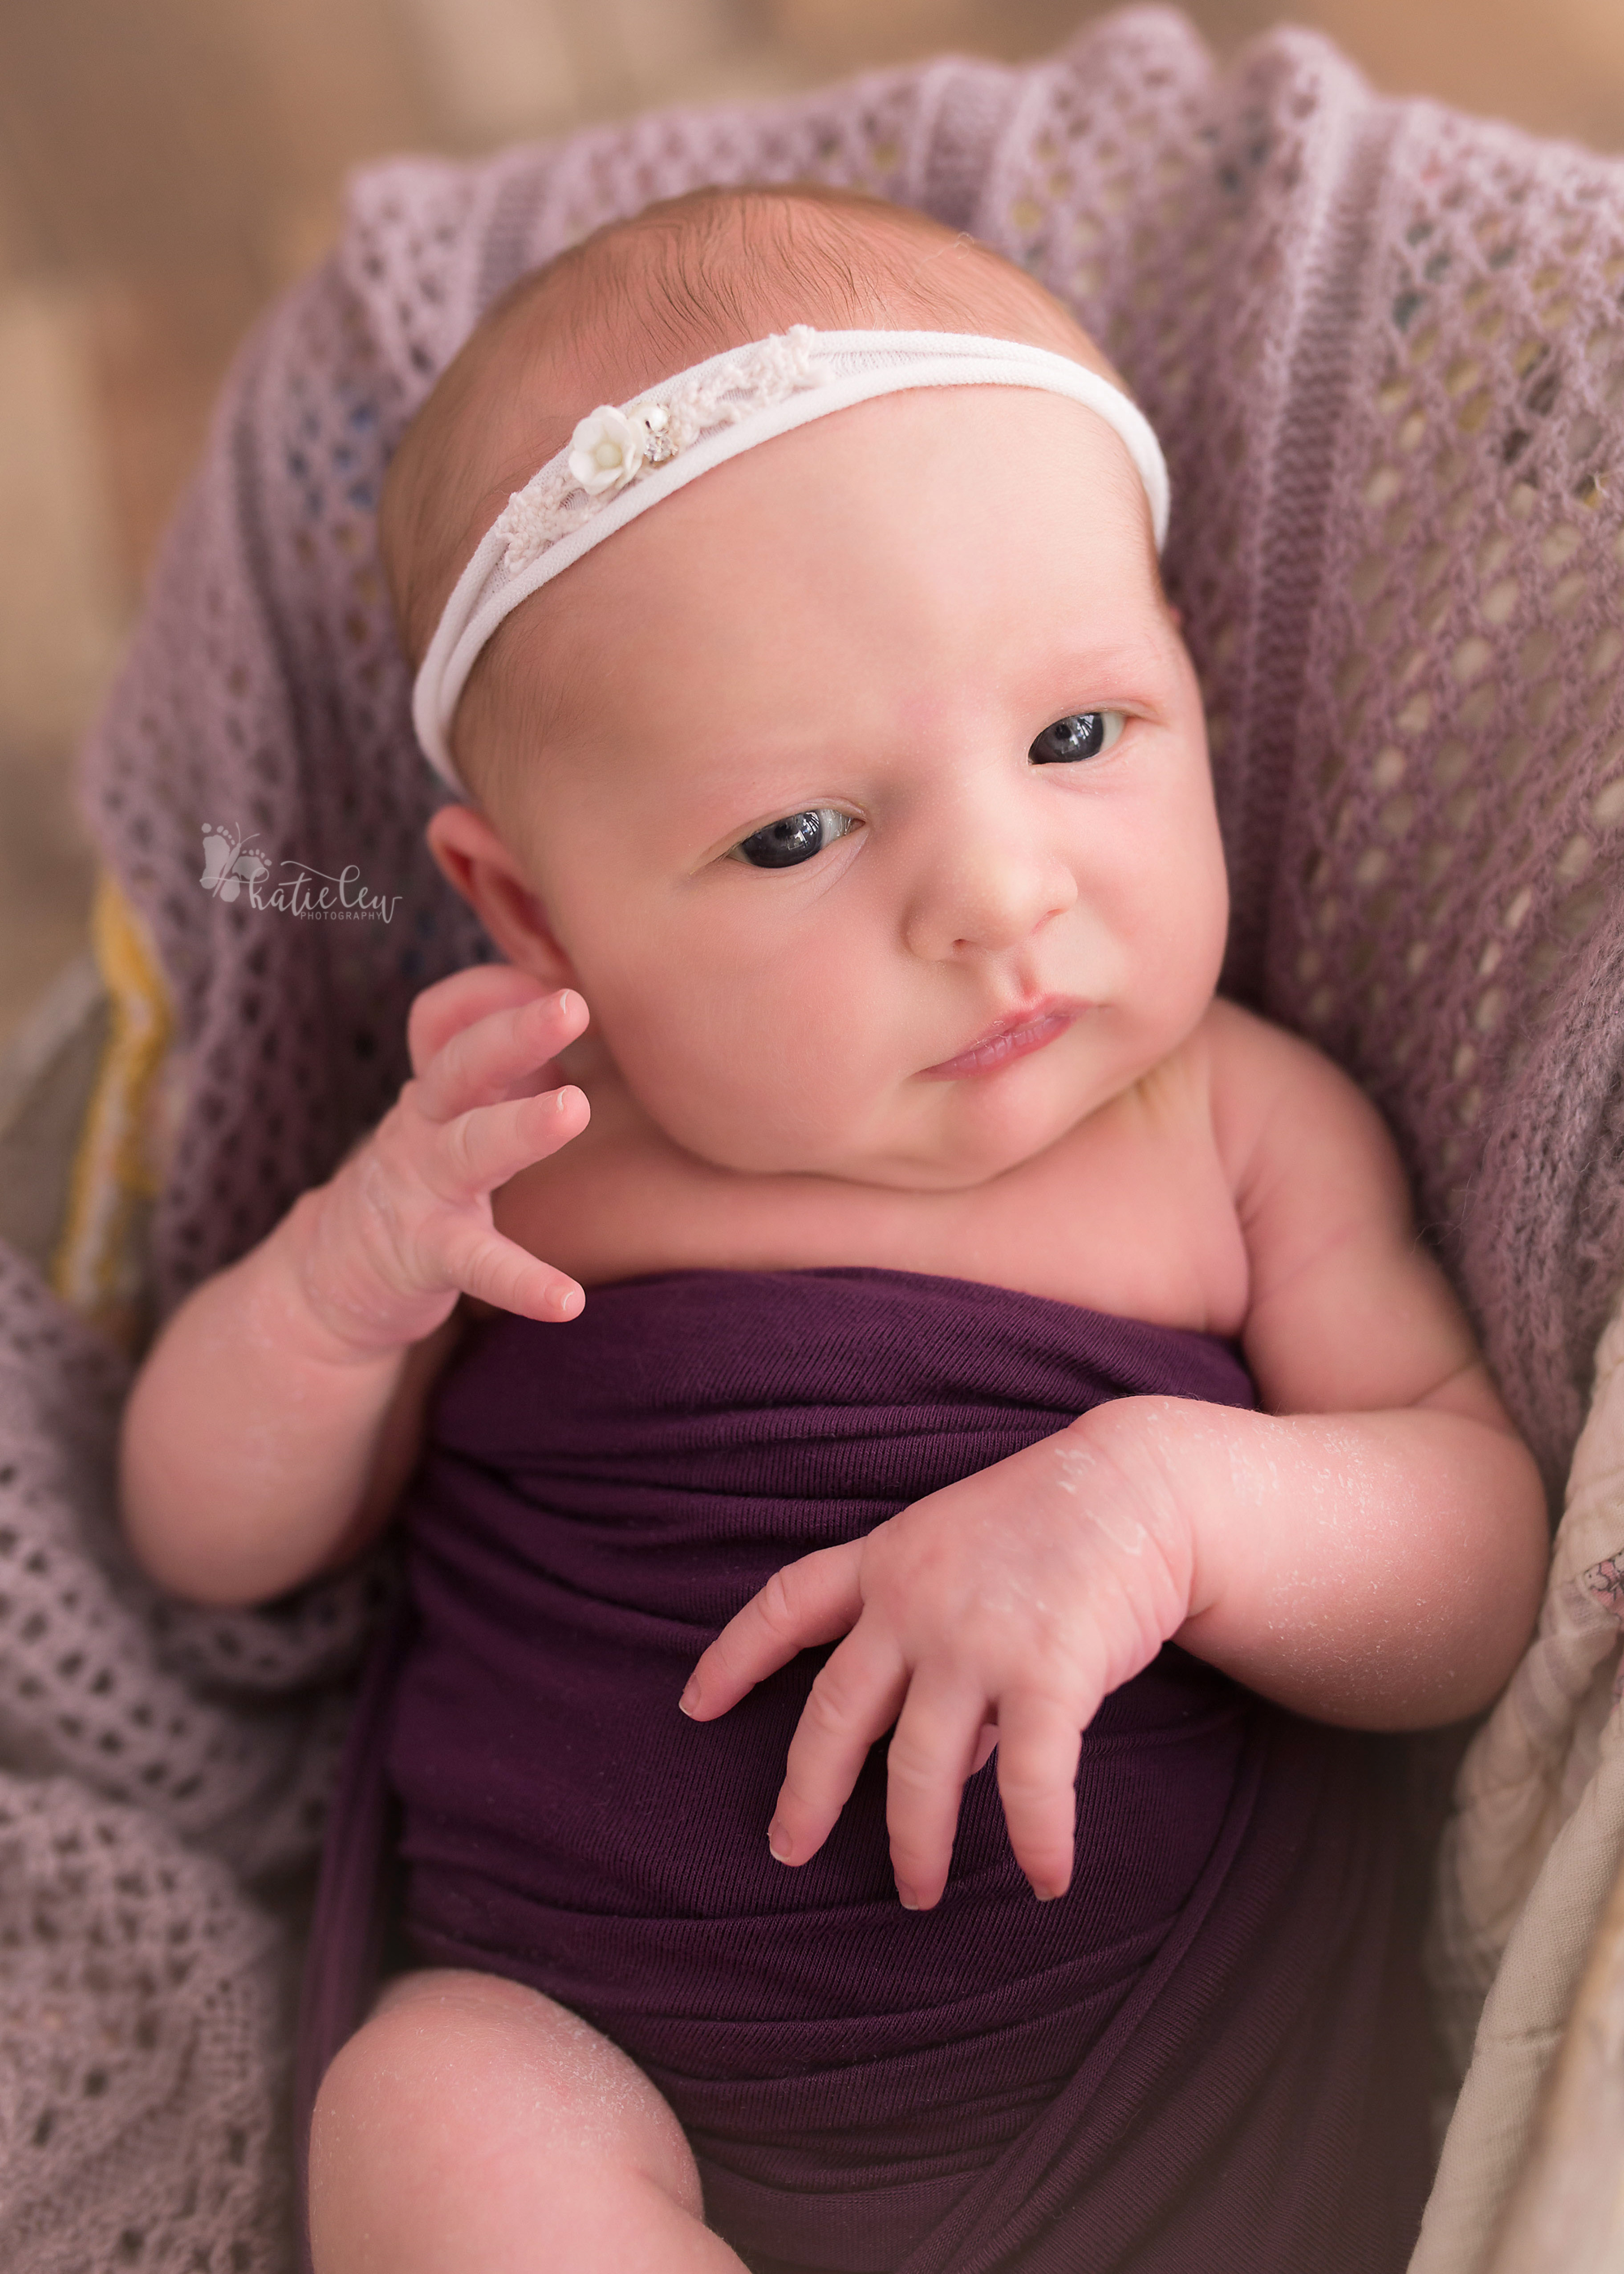 baby girl in purple with a white headband.